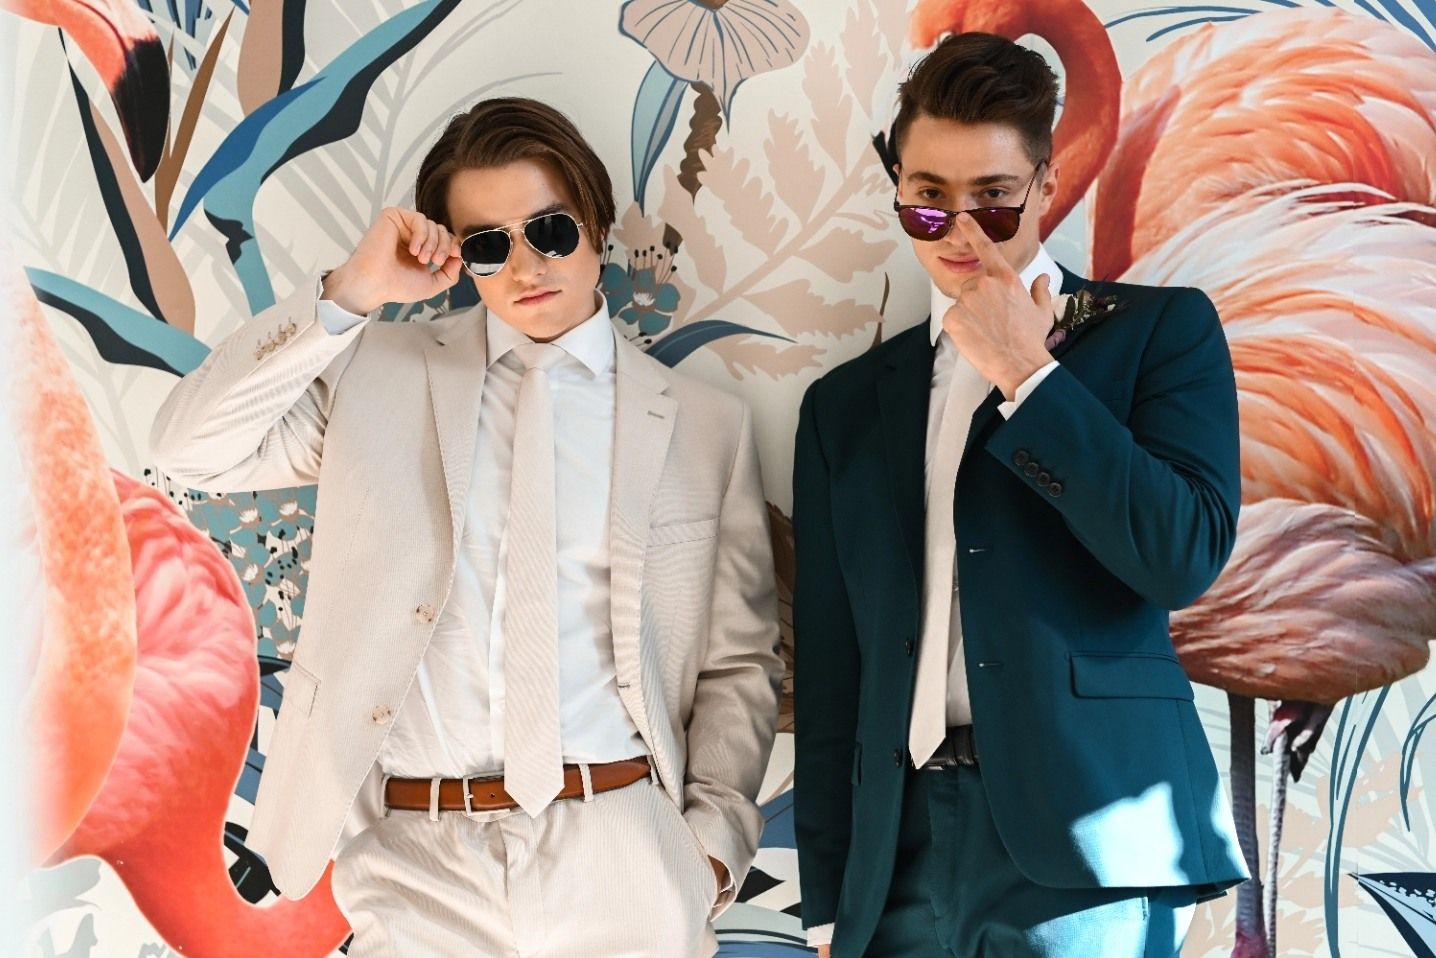 Light tan suit for prom & brown belt, teal prom suit & cool sunglasses with prom photo backdrop.